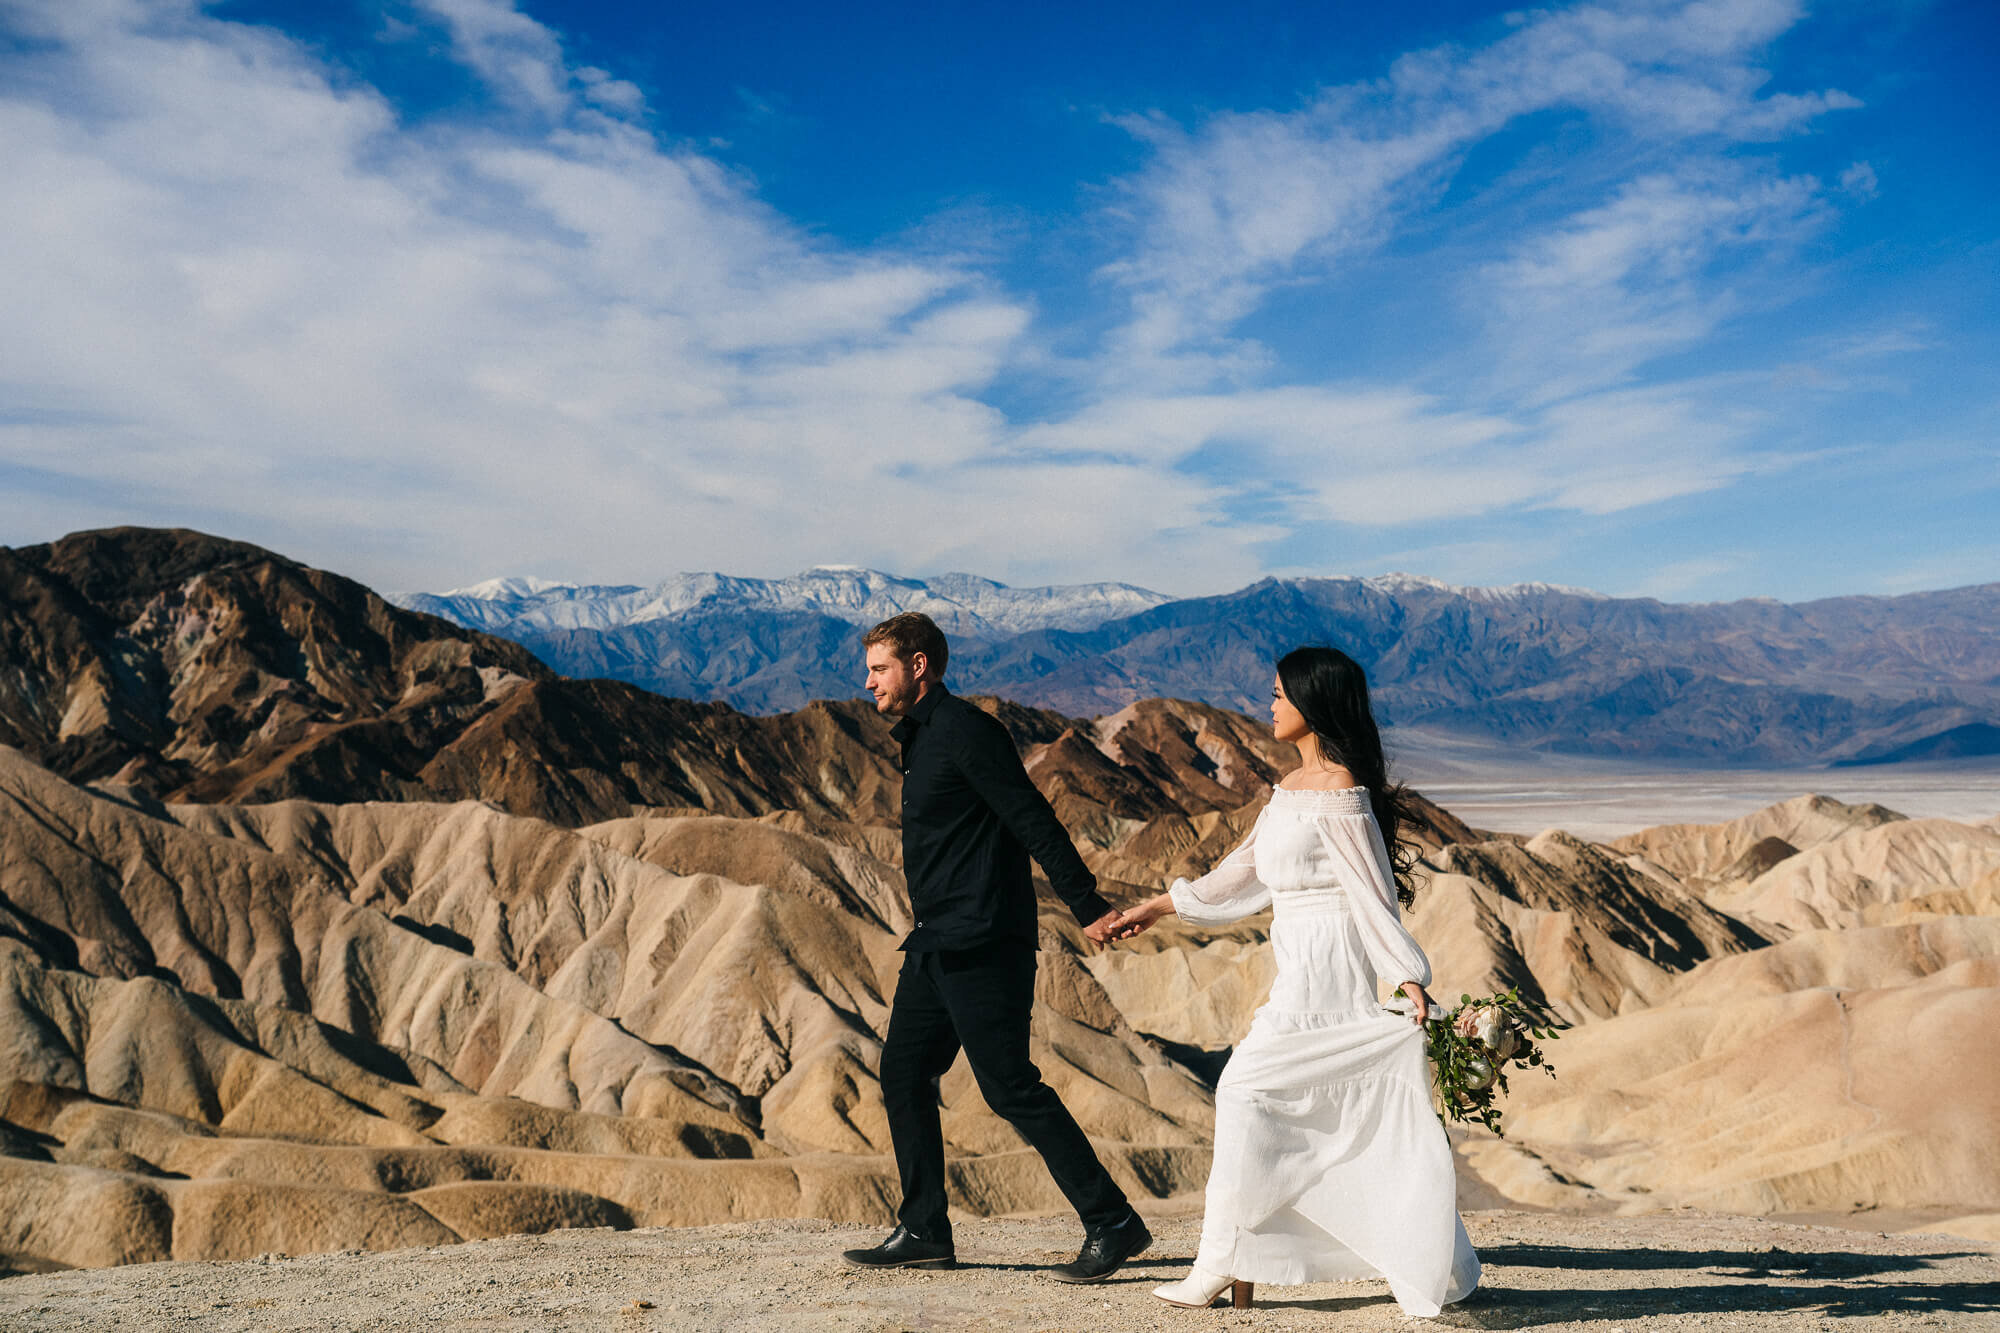 Couple walking hand in hand at zabriskie point in Death Valley National Park during their elopement.